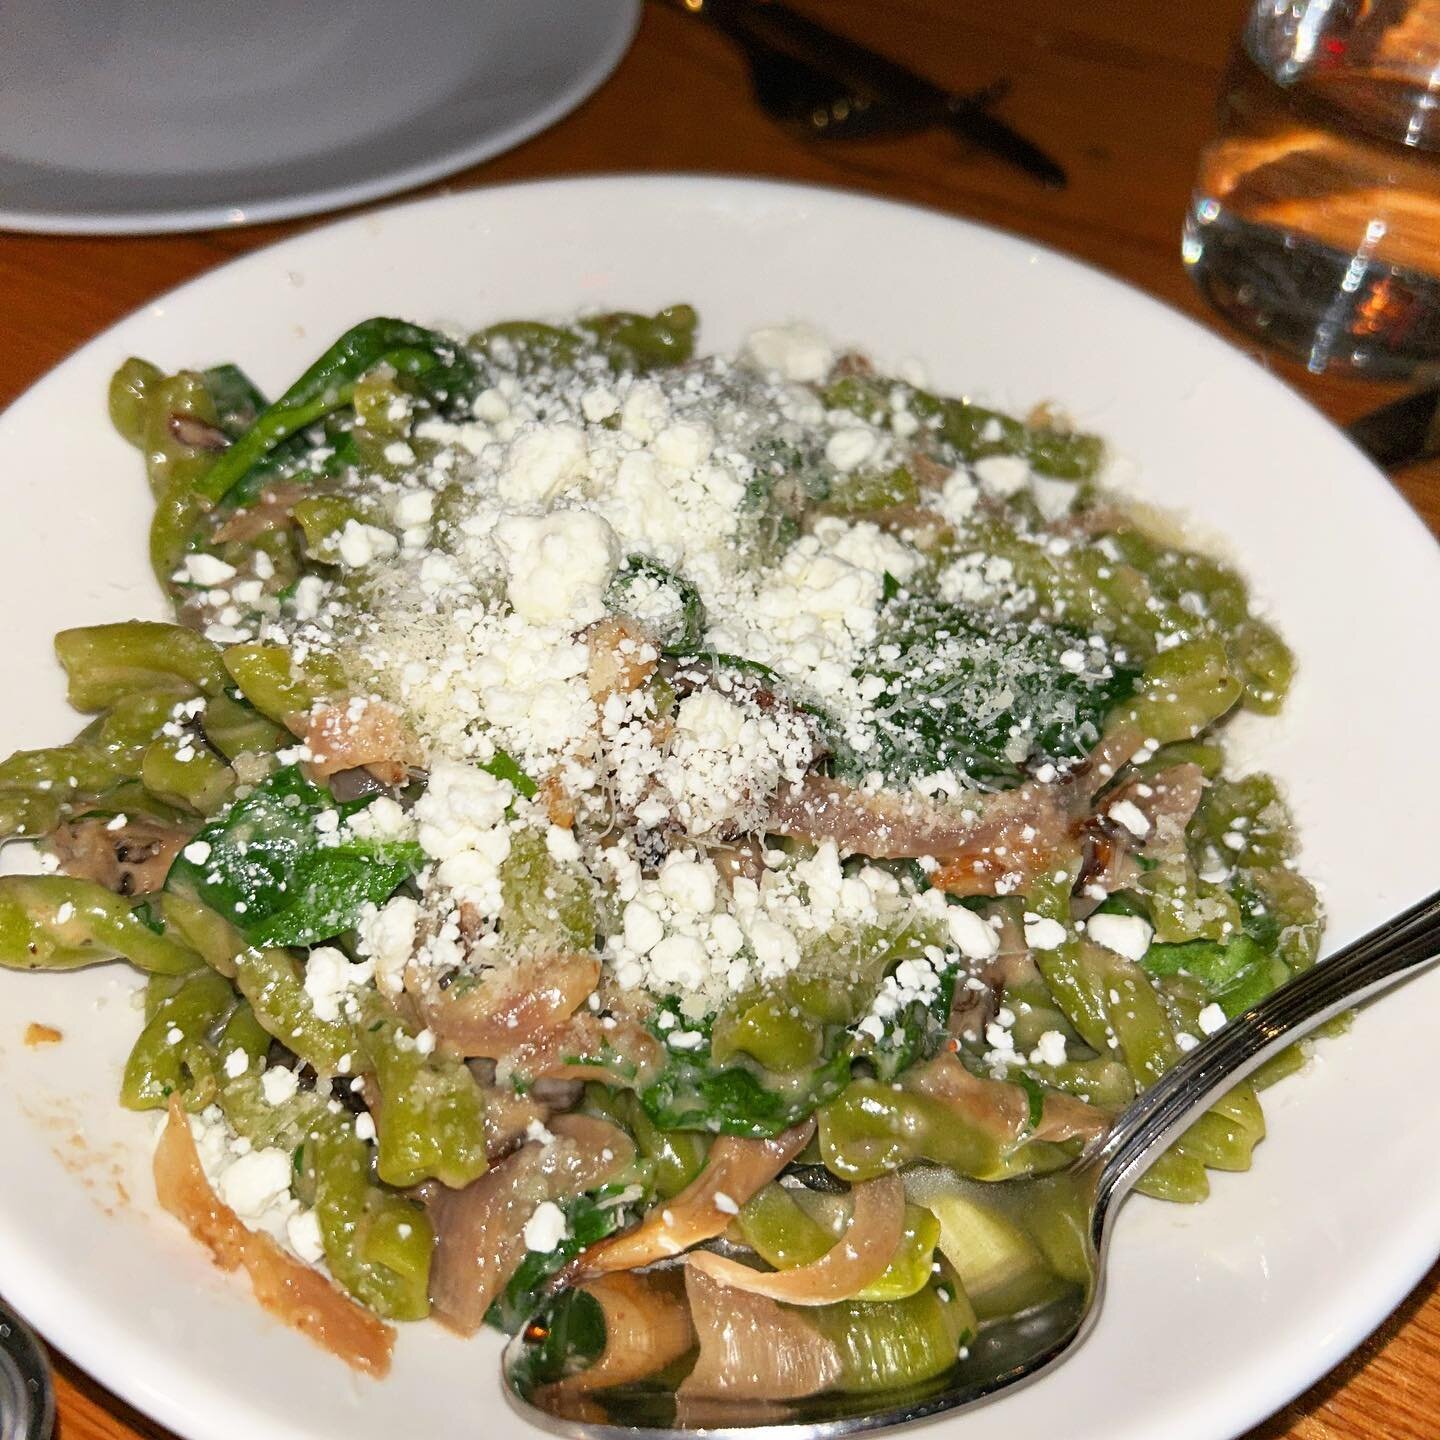 An eat your greens loophole 🍀
The Gemelli Verde with maitake mushrooms, spinach and goat cheese from @ammazzacaffe.nyc 
.
.
.
#pasta #stpats #stpatricksday #happystpatricksday #cheers #green #stpattysday #greenpasta #gemelli #cheese #spinach #goatch